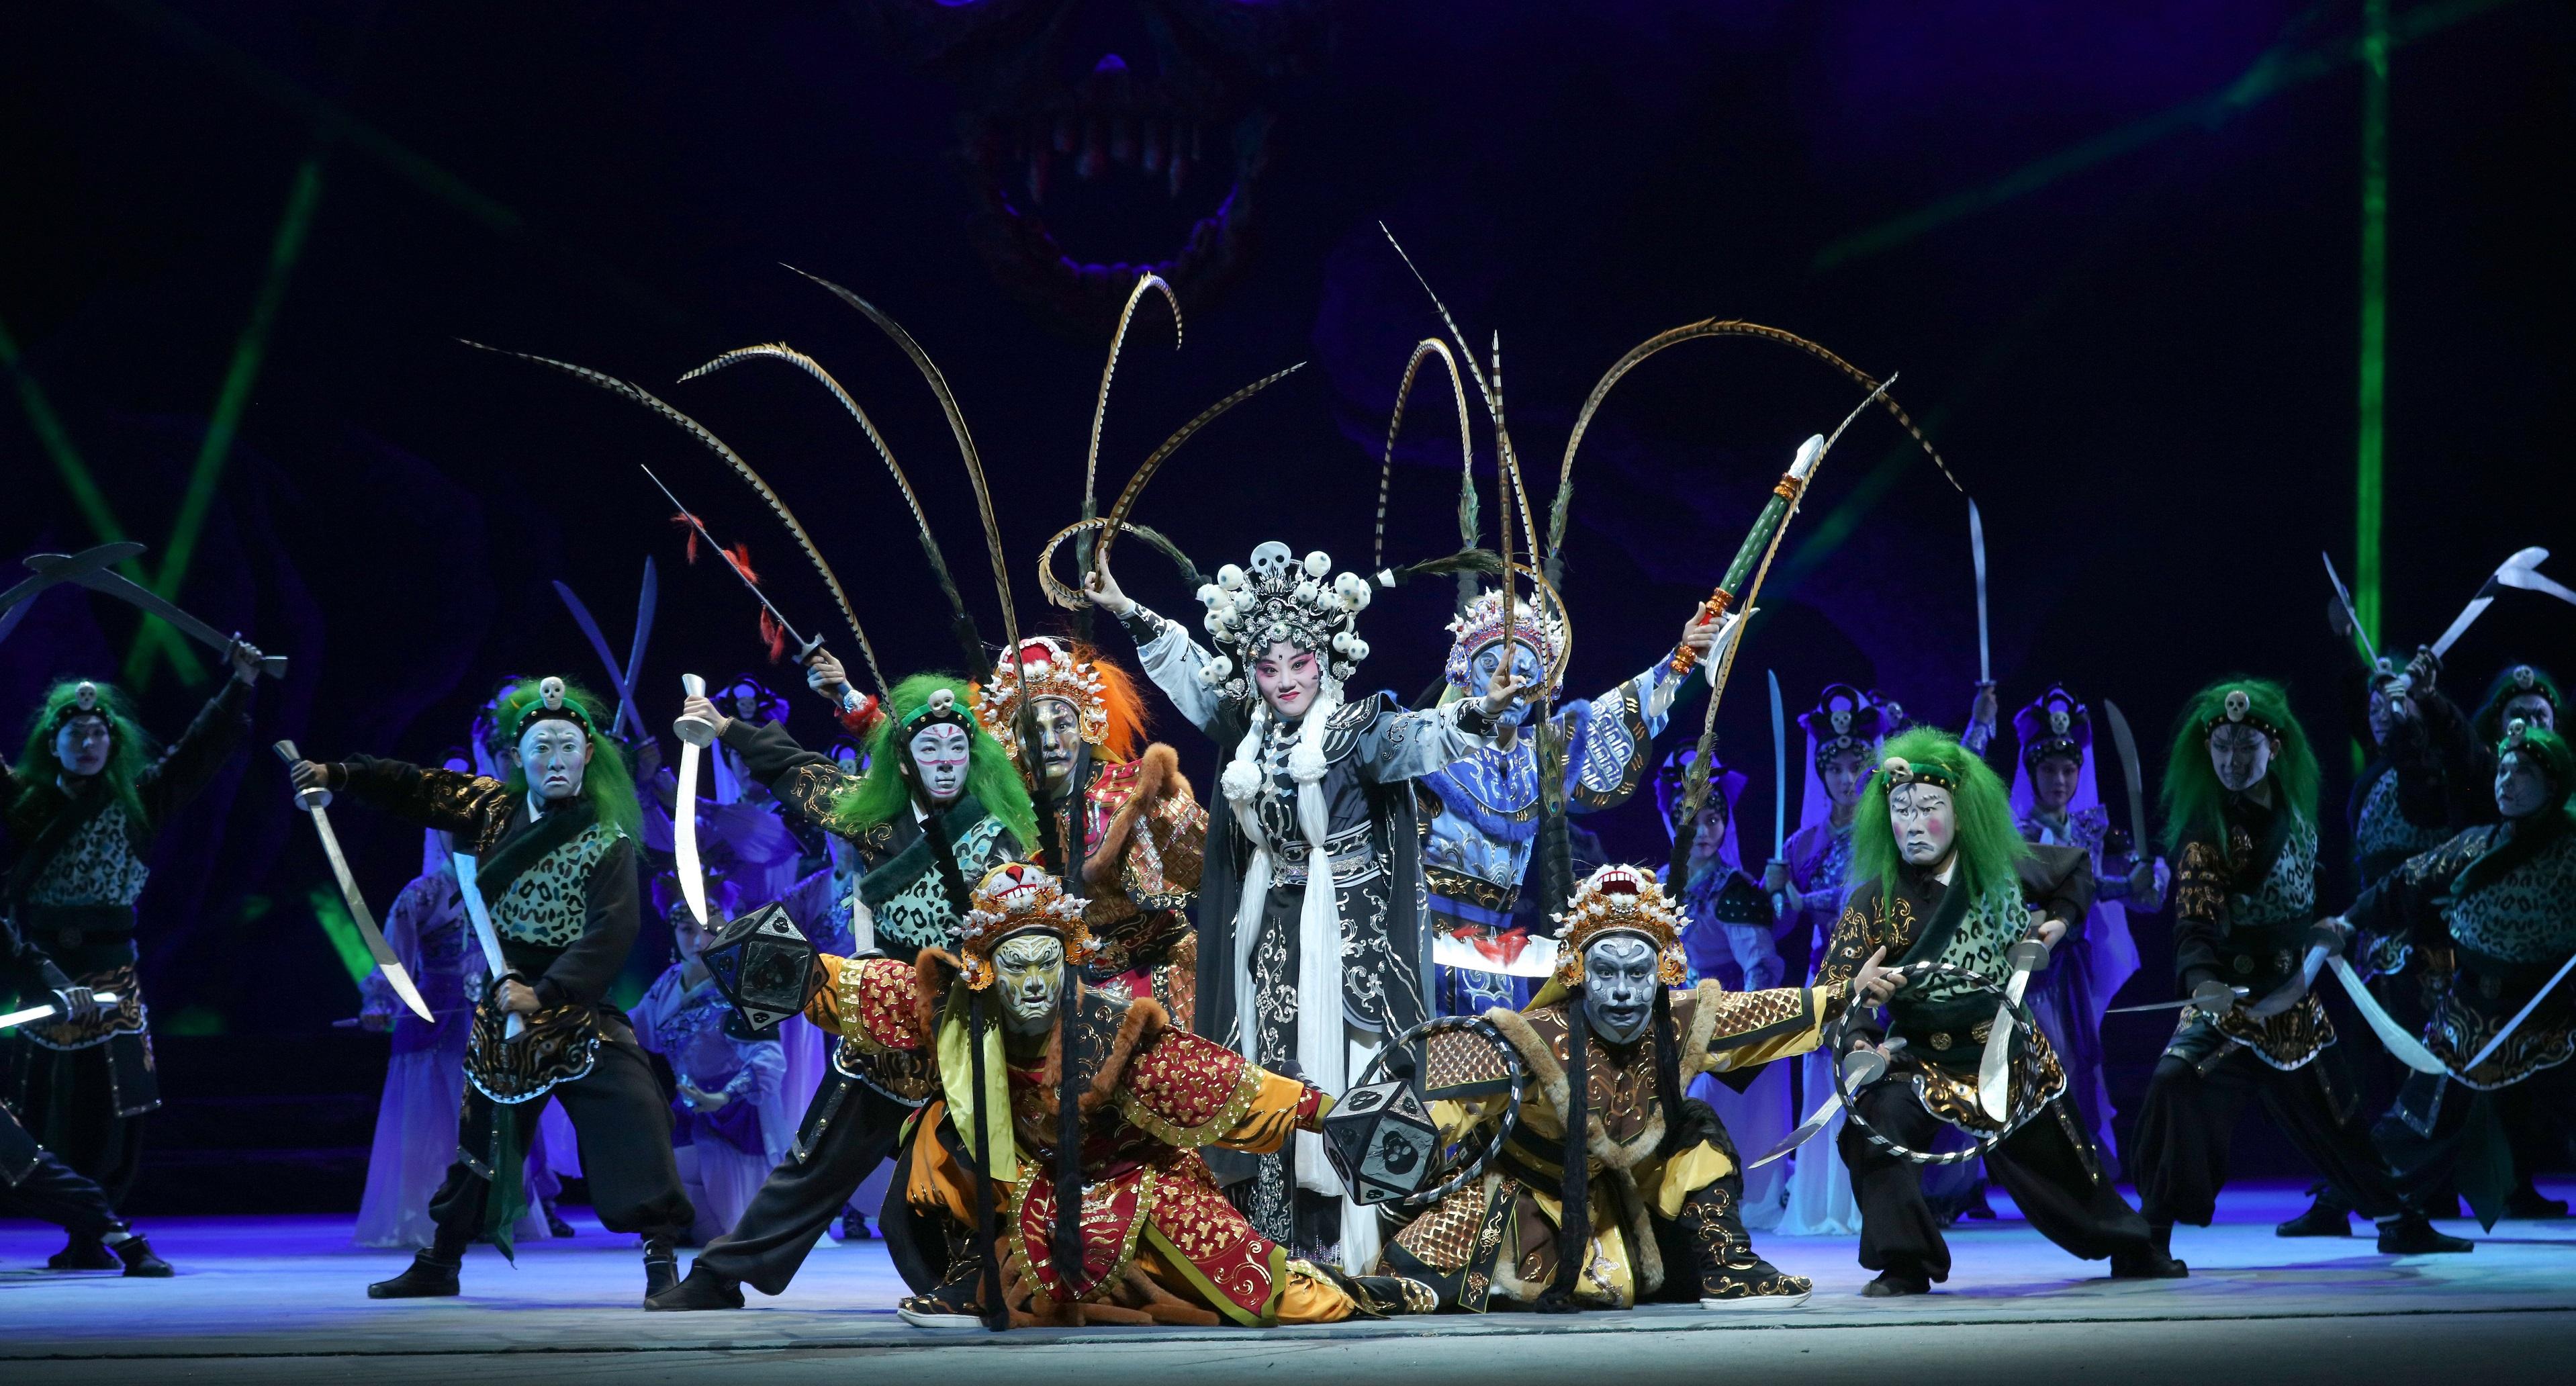 The Leisure and Cultural Services Department will present eight quality programmes at this year's Chinese Opera Festival from June to August. Photo shows a scene from the Wu opera performance "Sun Wu Kong Thrice Beat the Bony Demon".